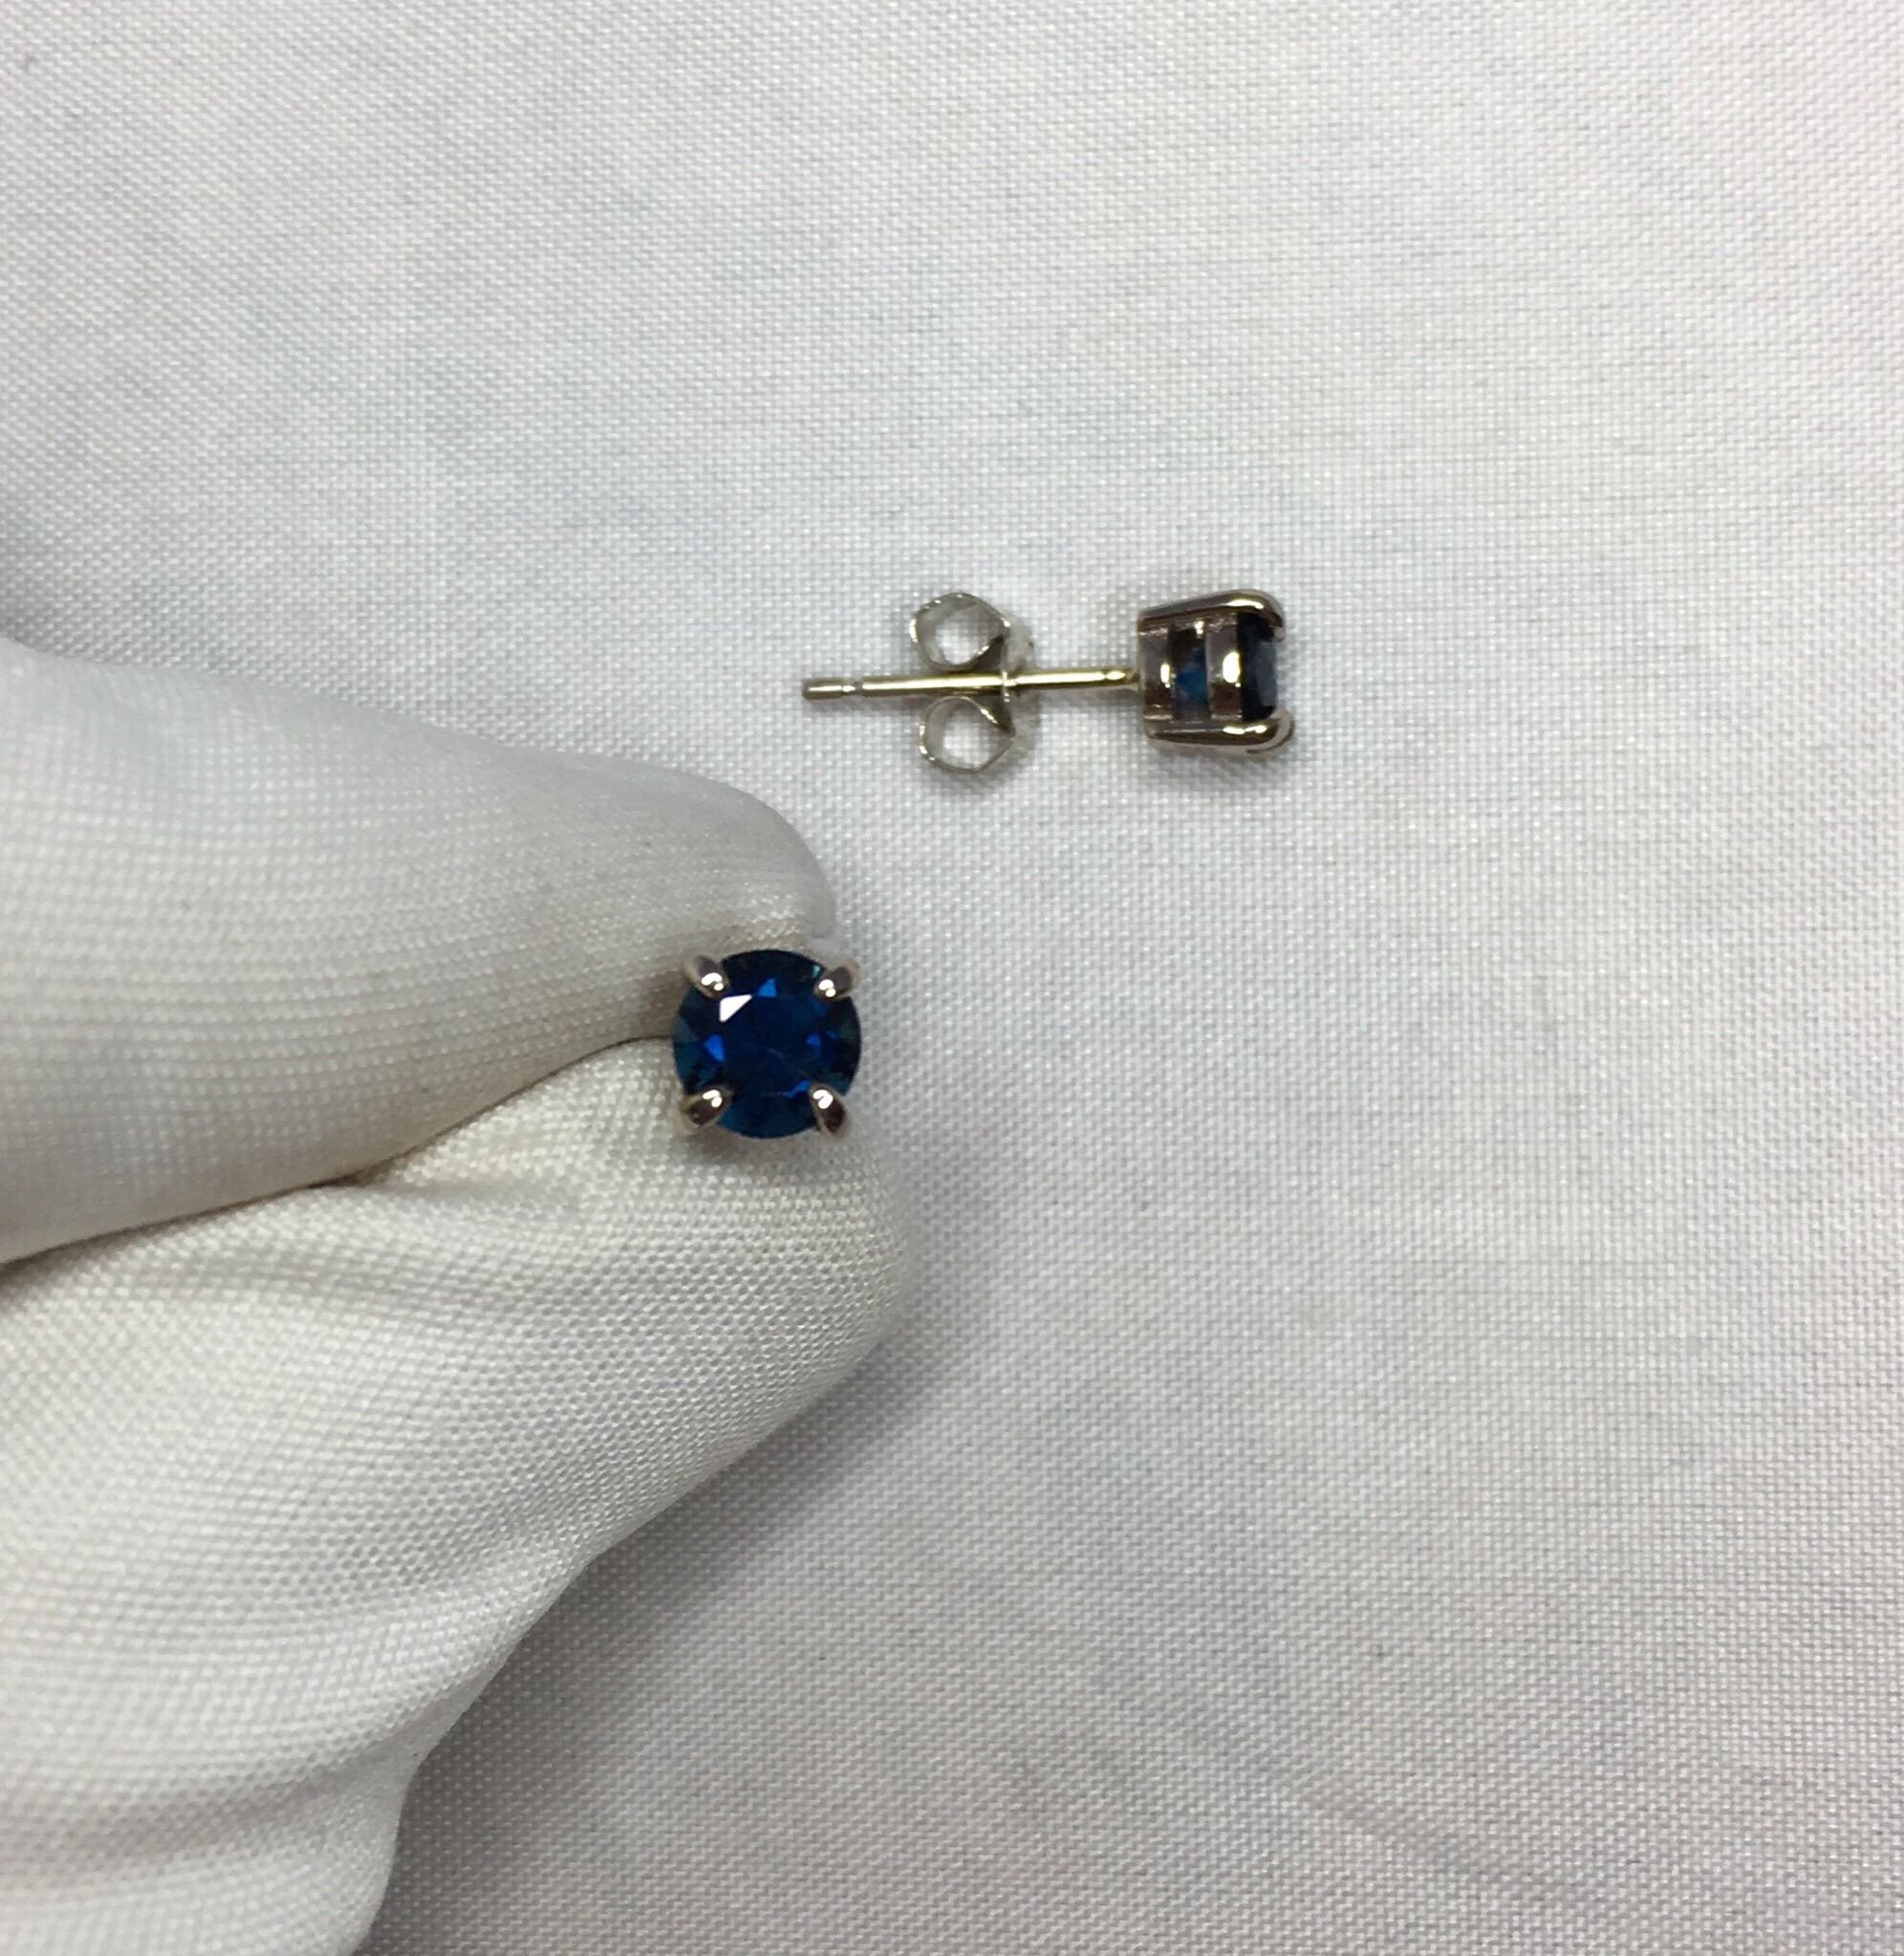 Stunning natural 5mm deep blue Australian Sapphire earring studs in 18k white gold.

1.22 carat matching pair.

Both have a beautiful deep blue colour and excellent clarity.
They also have an excellent round cut and look stunning when the light